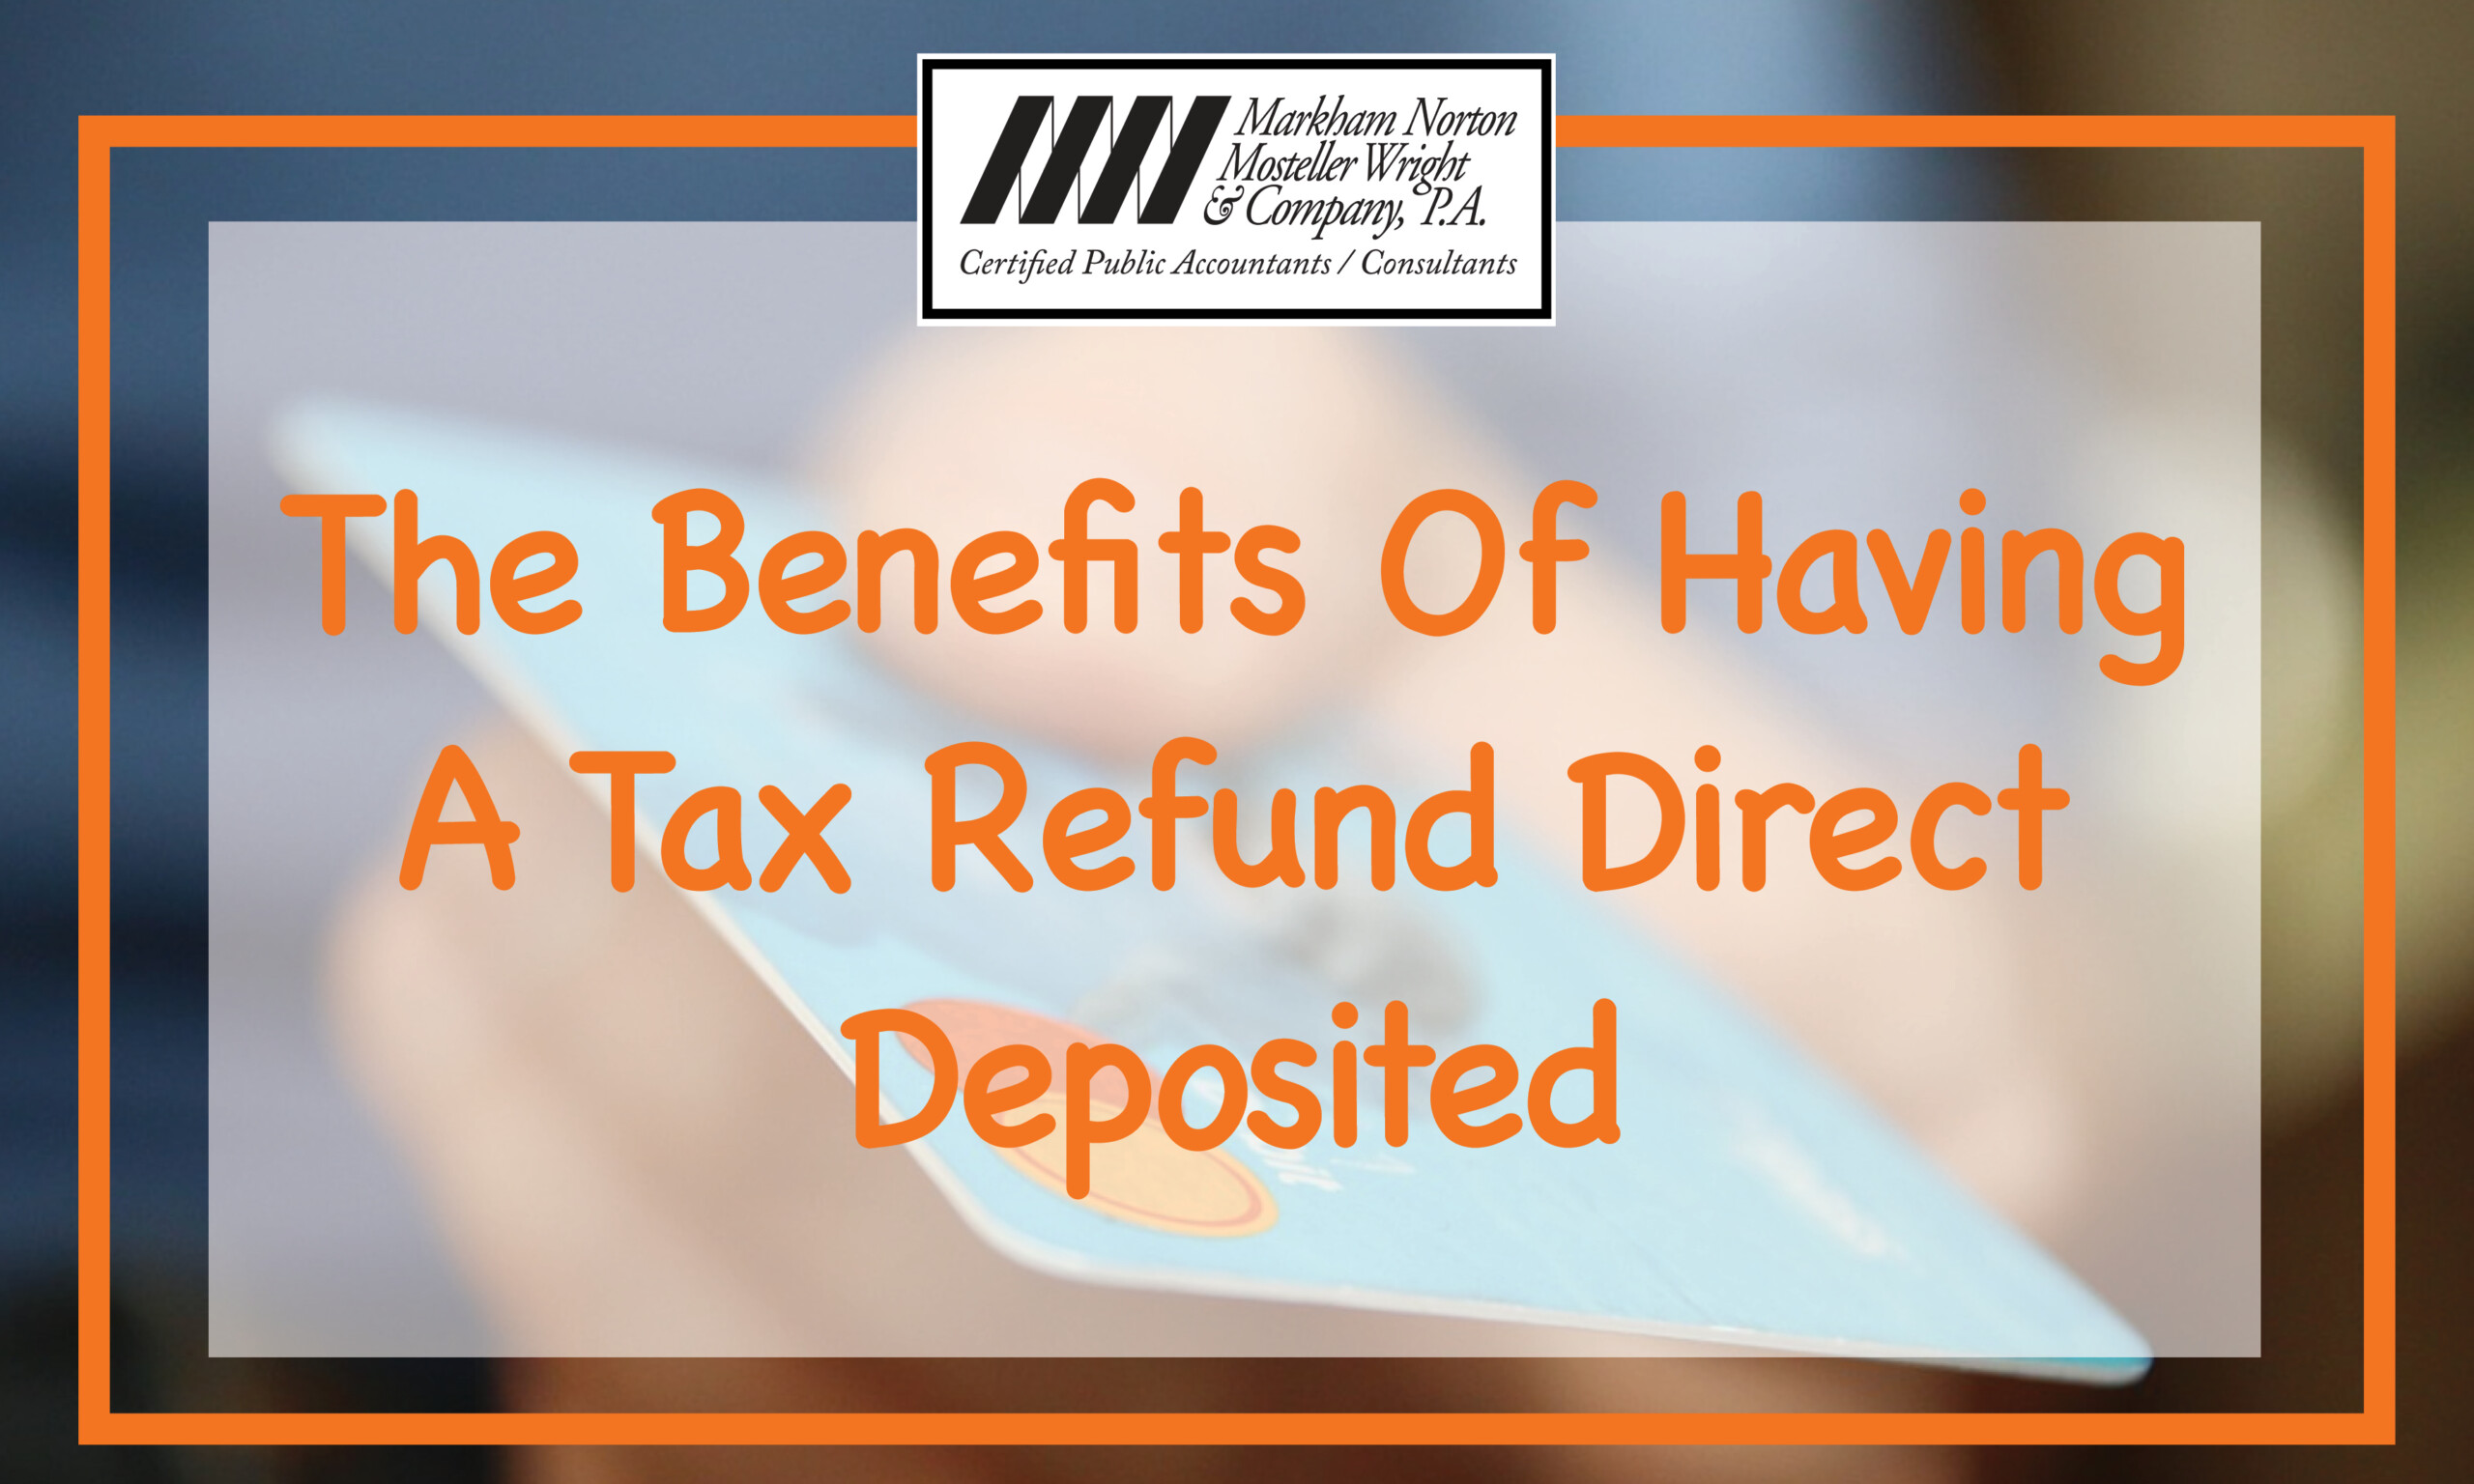 the-benefits-to-tax-refund-direct-deposited-ft-myers-naples-mnmw